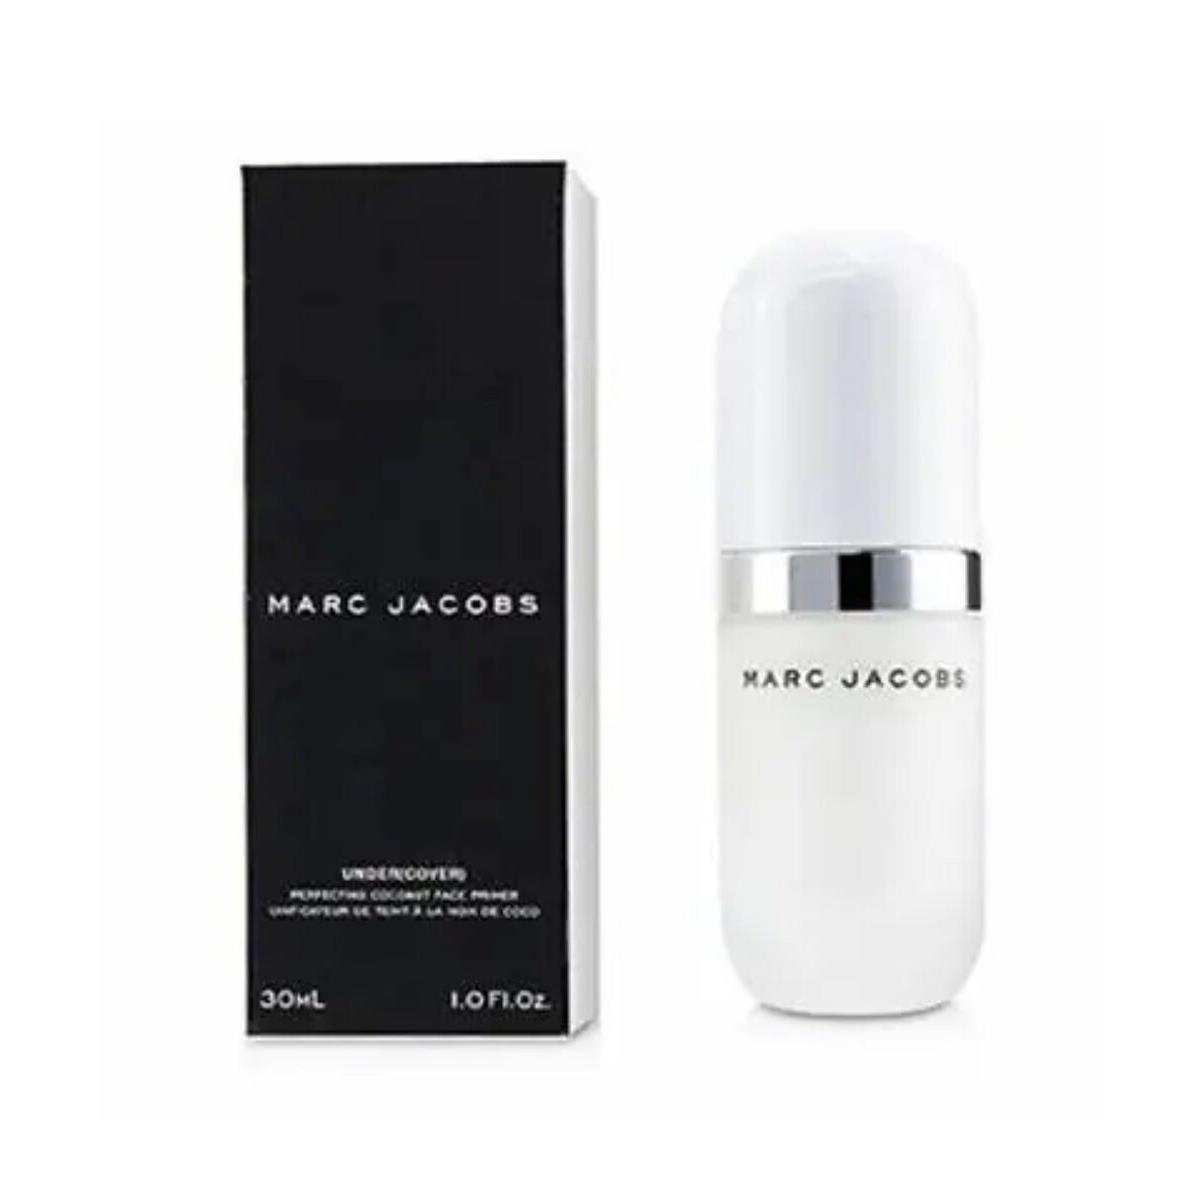 Marc Jacobs: Undercover Perfecting Coconut Face Primer. 1.0 Floz. Now $44-S49 30 INVISIBLE WITH BOX